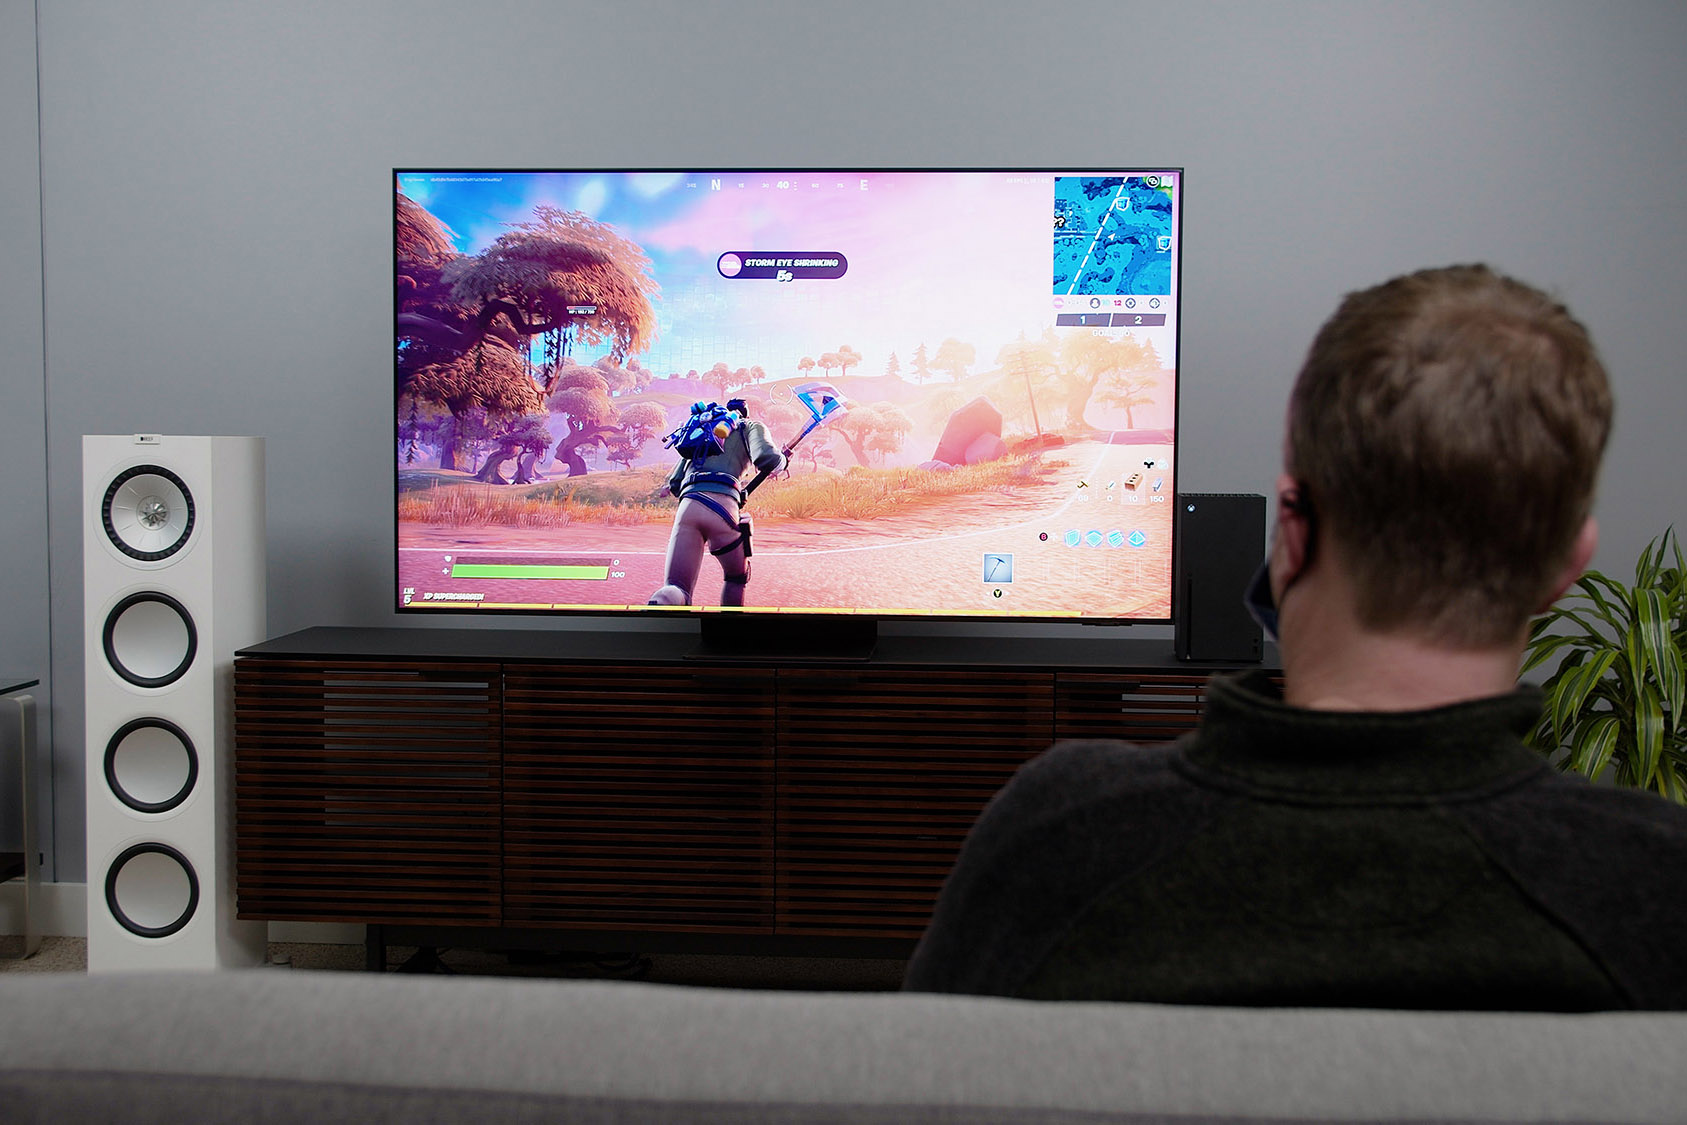 fortnite on the Samsung QN90A TV